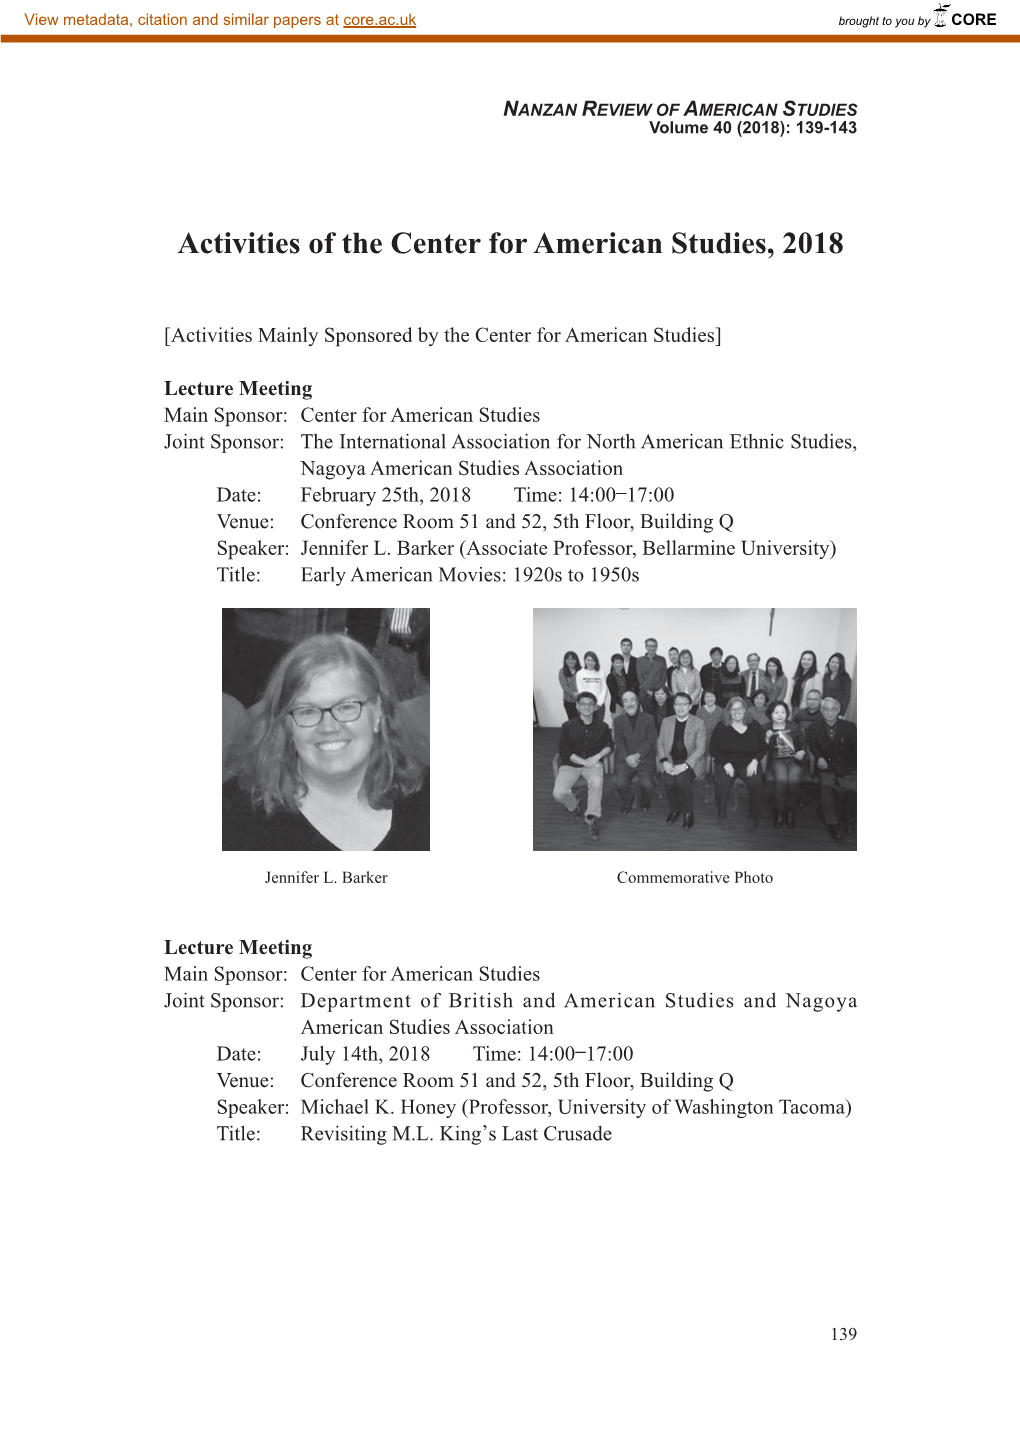 Activities of the Center for American Studies, 2018